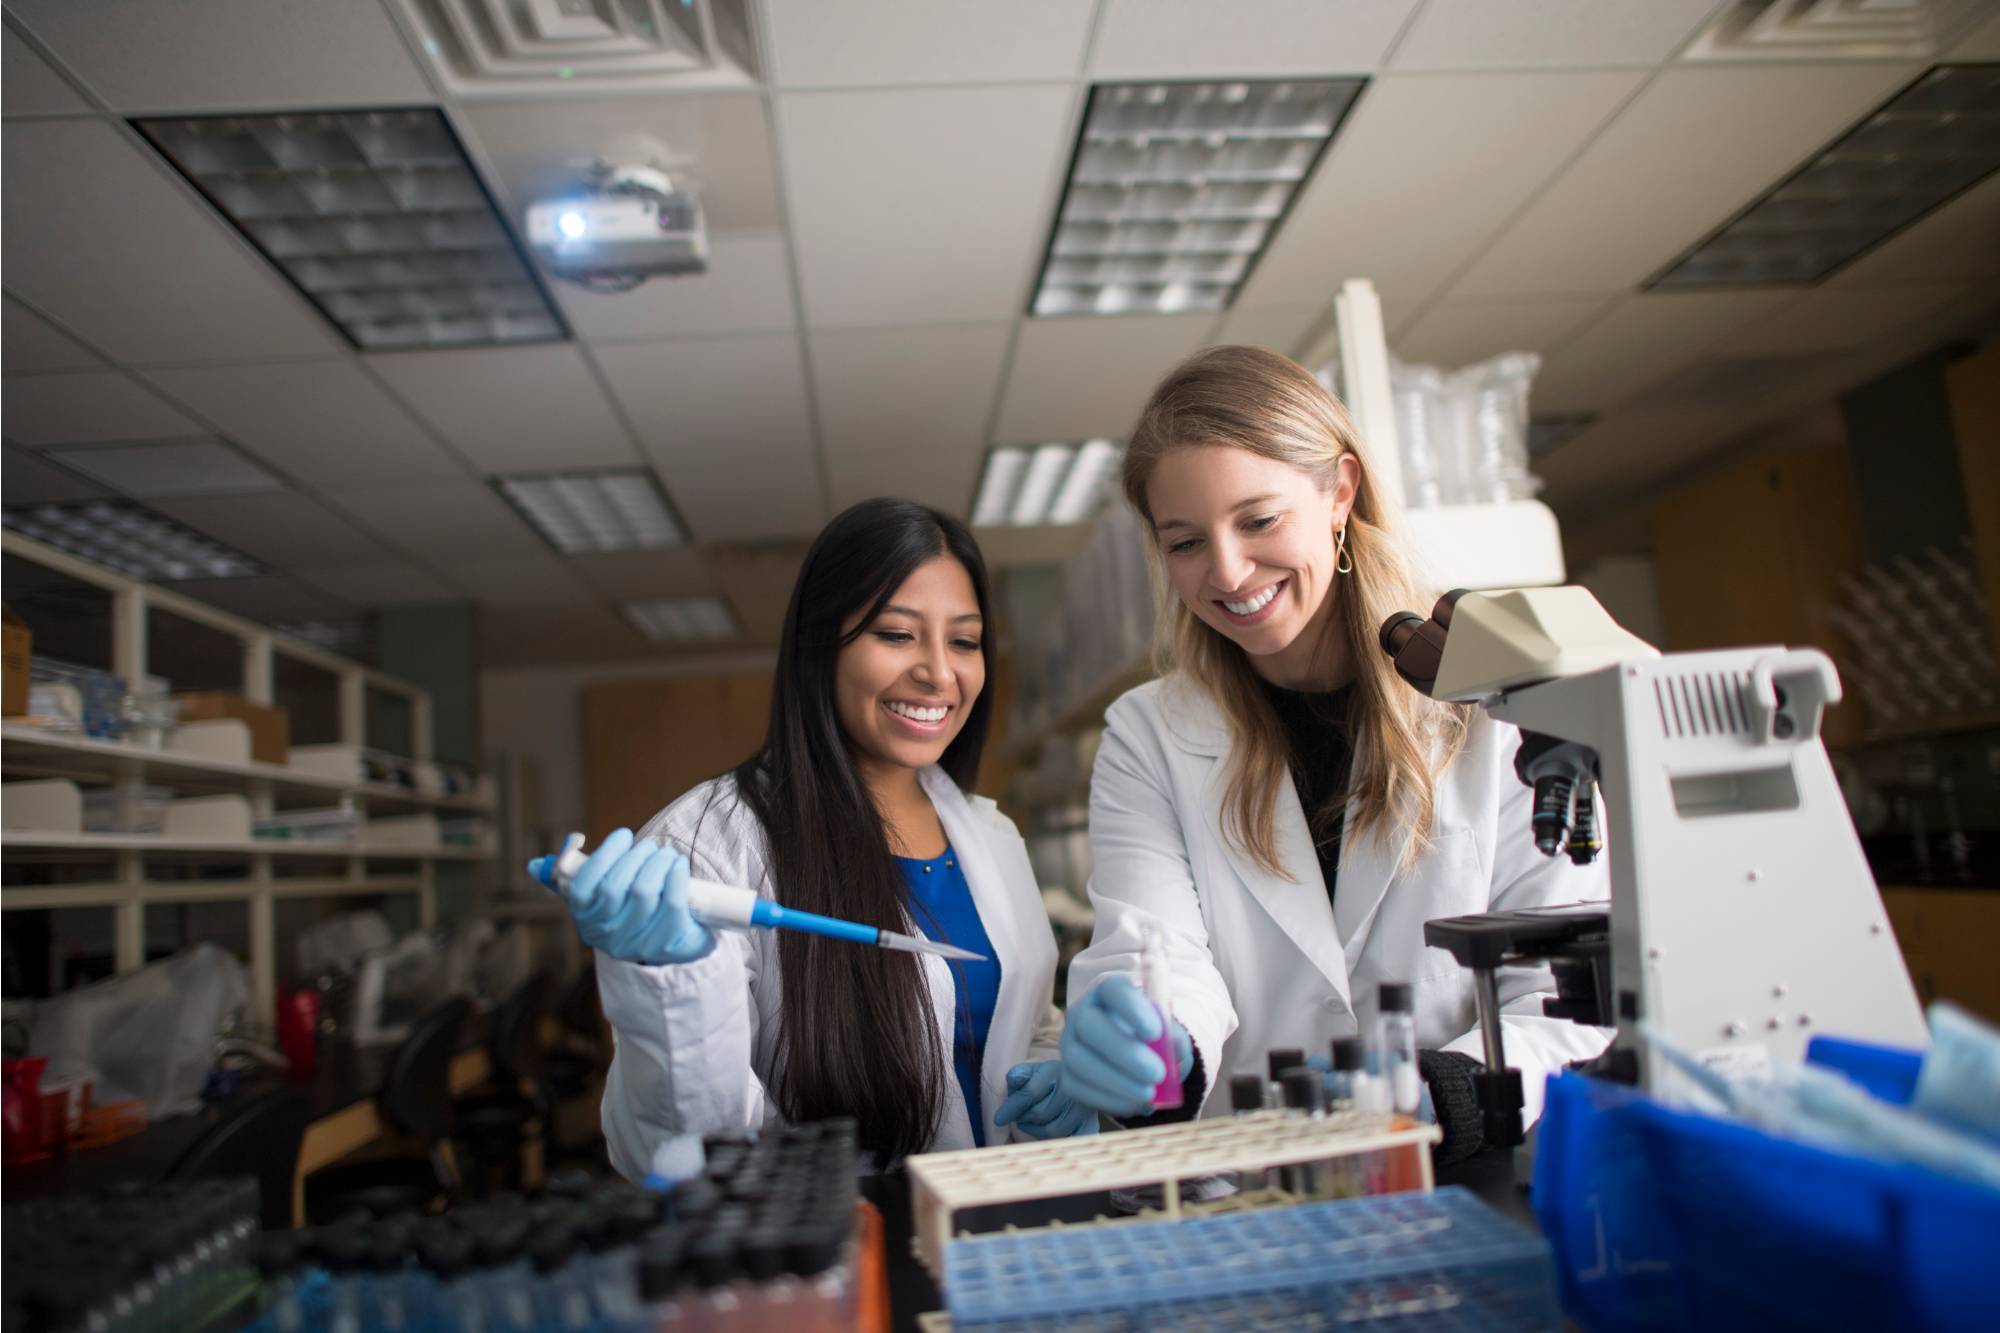 A GVSU student works with a faculty member in a lab.